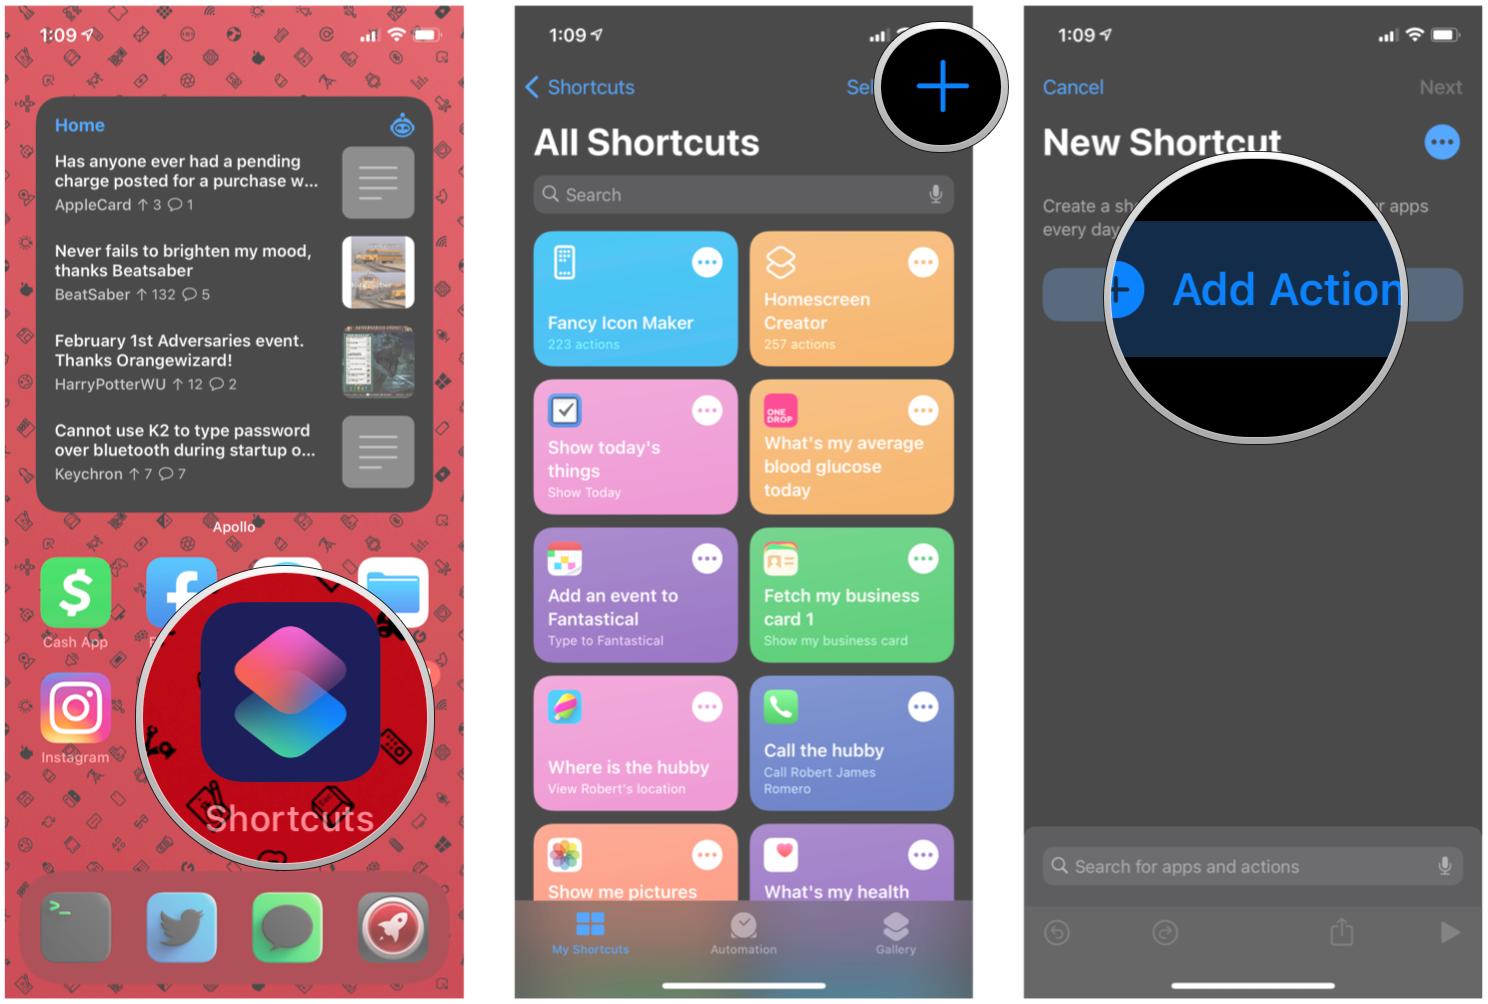 How to customize an app icon in Shortcuts by showing: Launch Shortcuts, tap New Shortcut, tap Add Action